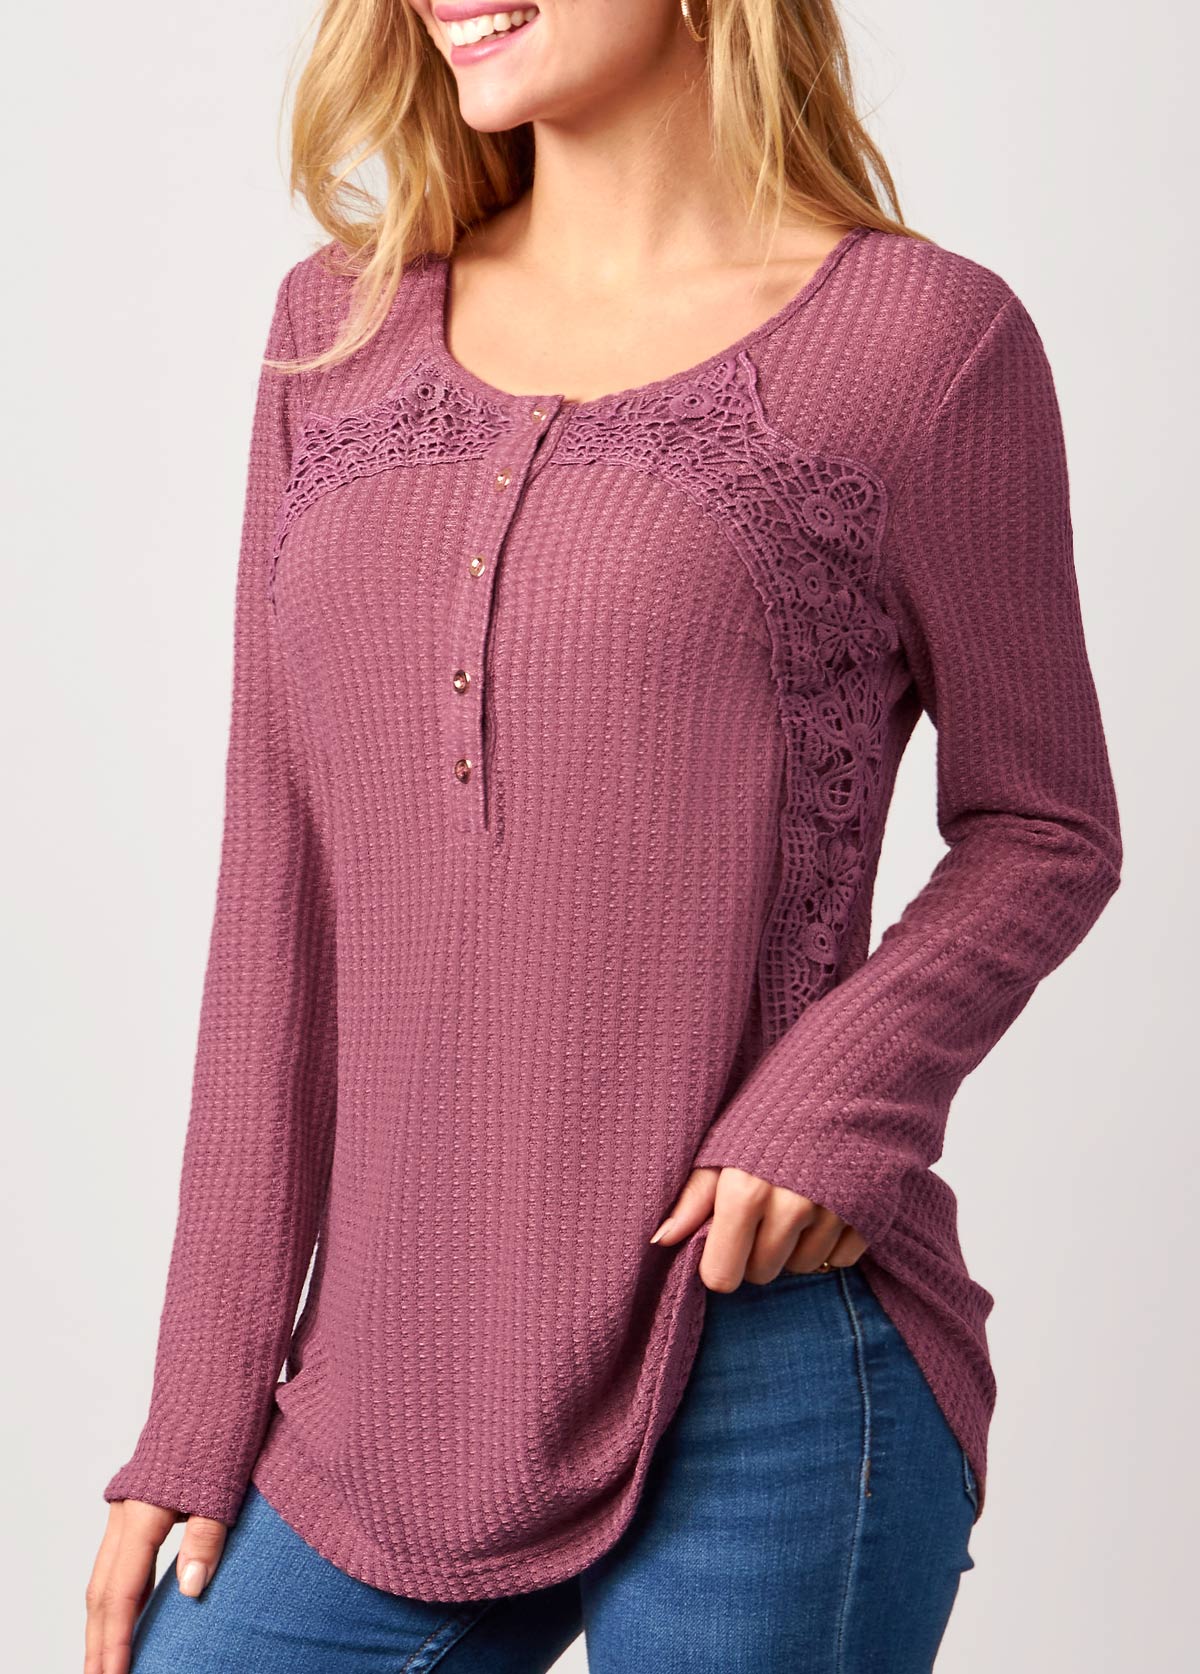 Waffle Knit Lace Patchwork Dusty Pink T Shirt